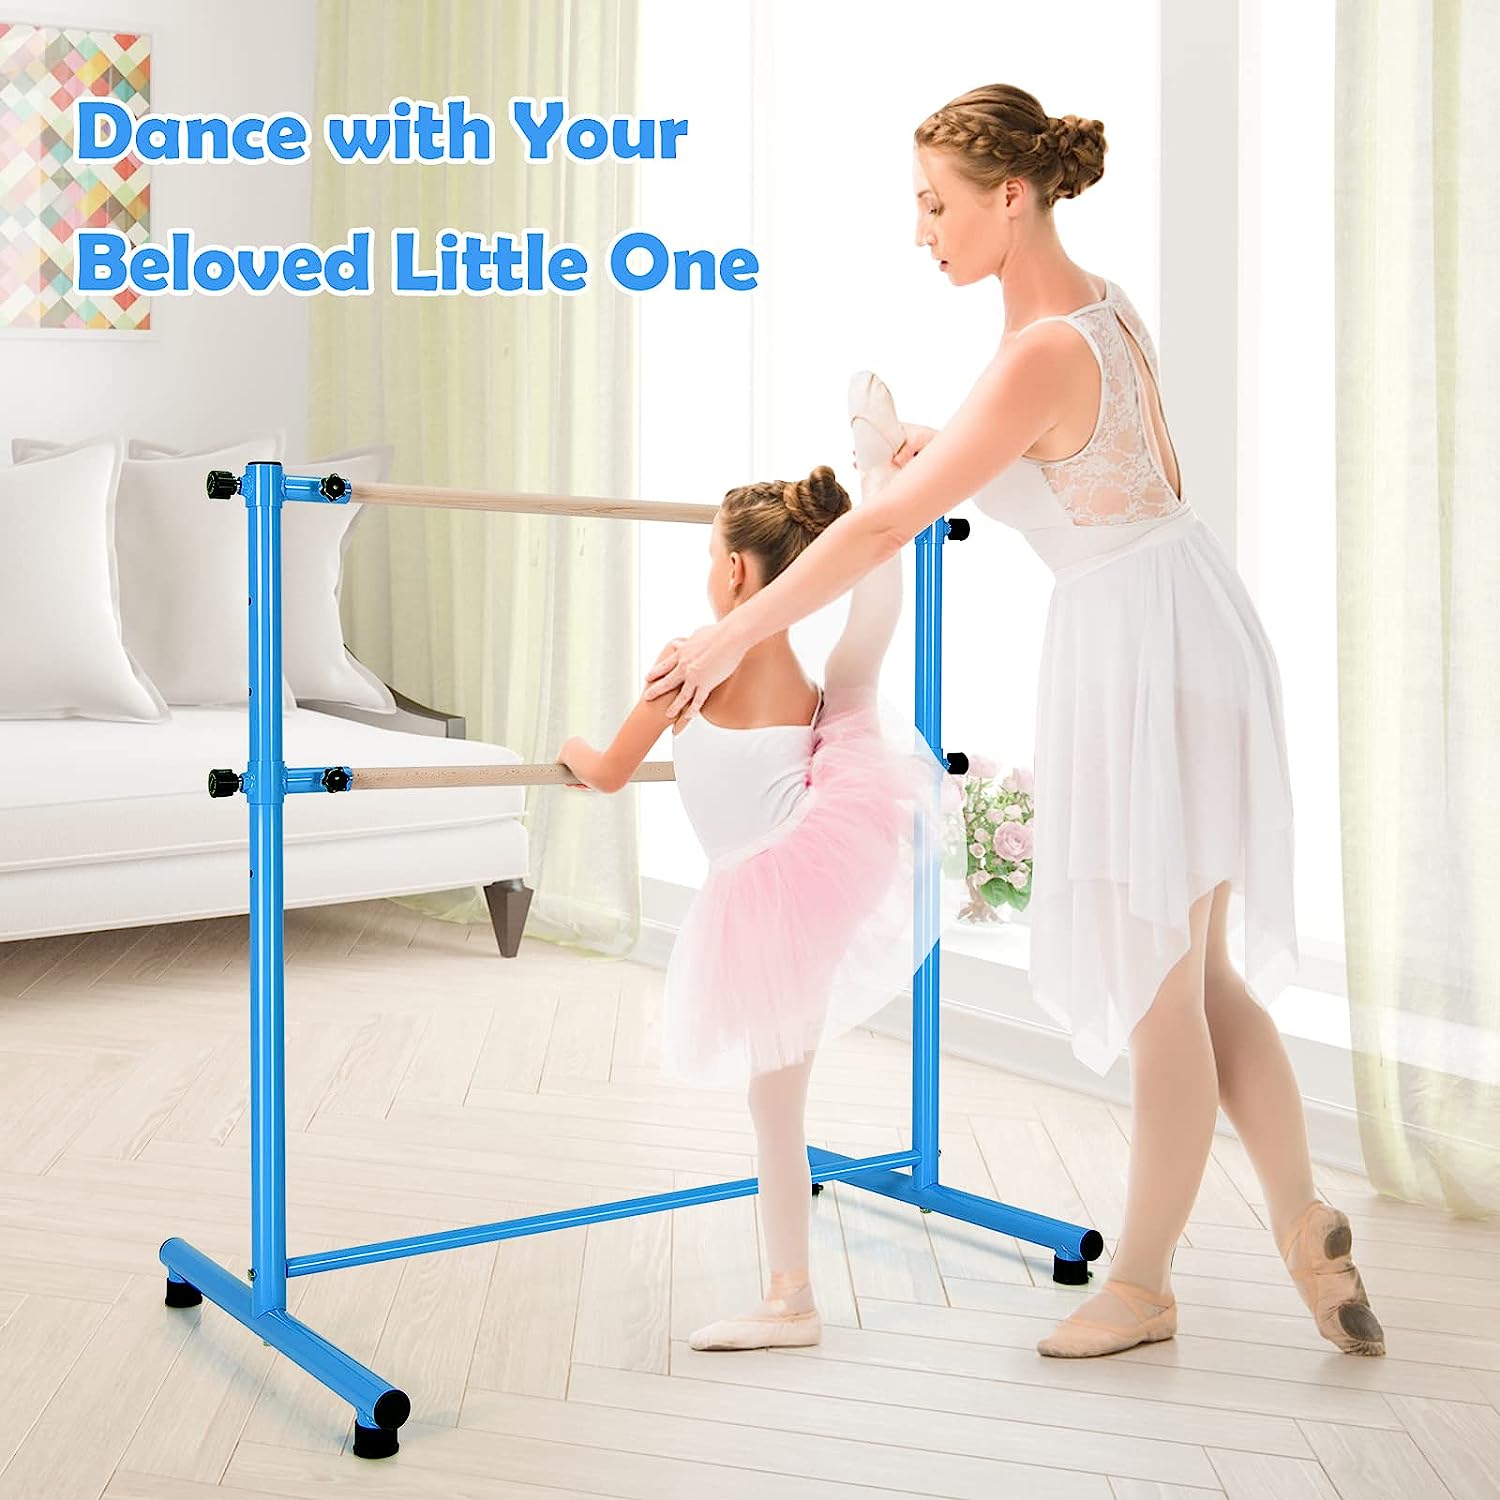 Double Ballet Barre Portable, 47” Freestanding Dancing Barre with 5 Adjustable Heights, Beech Wood Ballet Bar, Fitness Stretching Dancing Bar for Home, Gym, Dancing Room